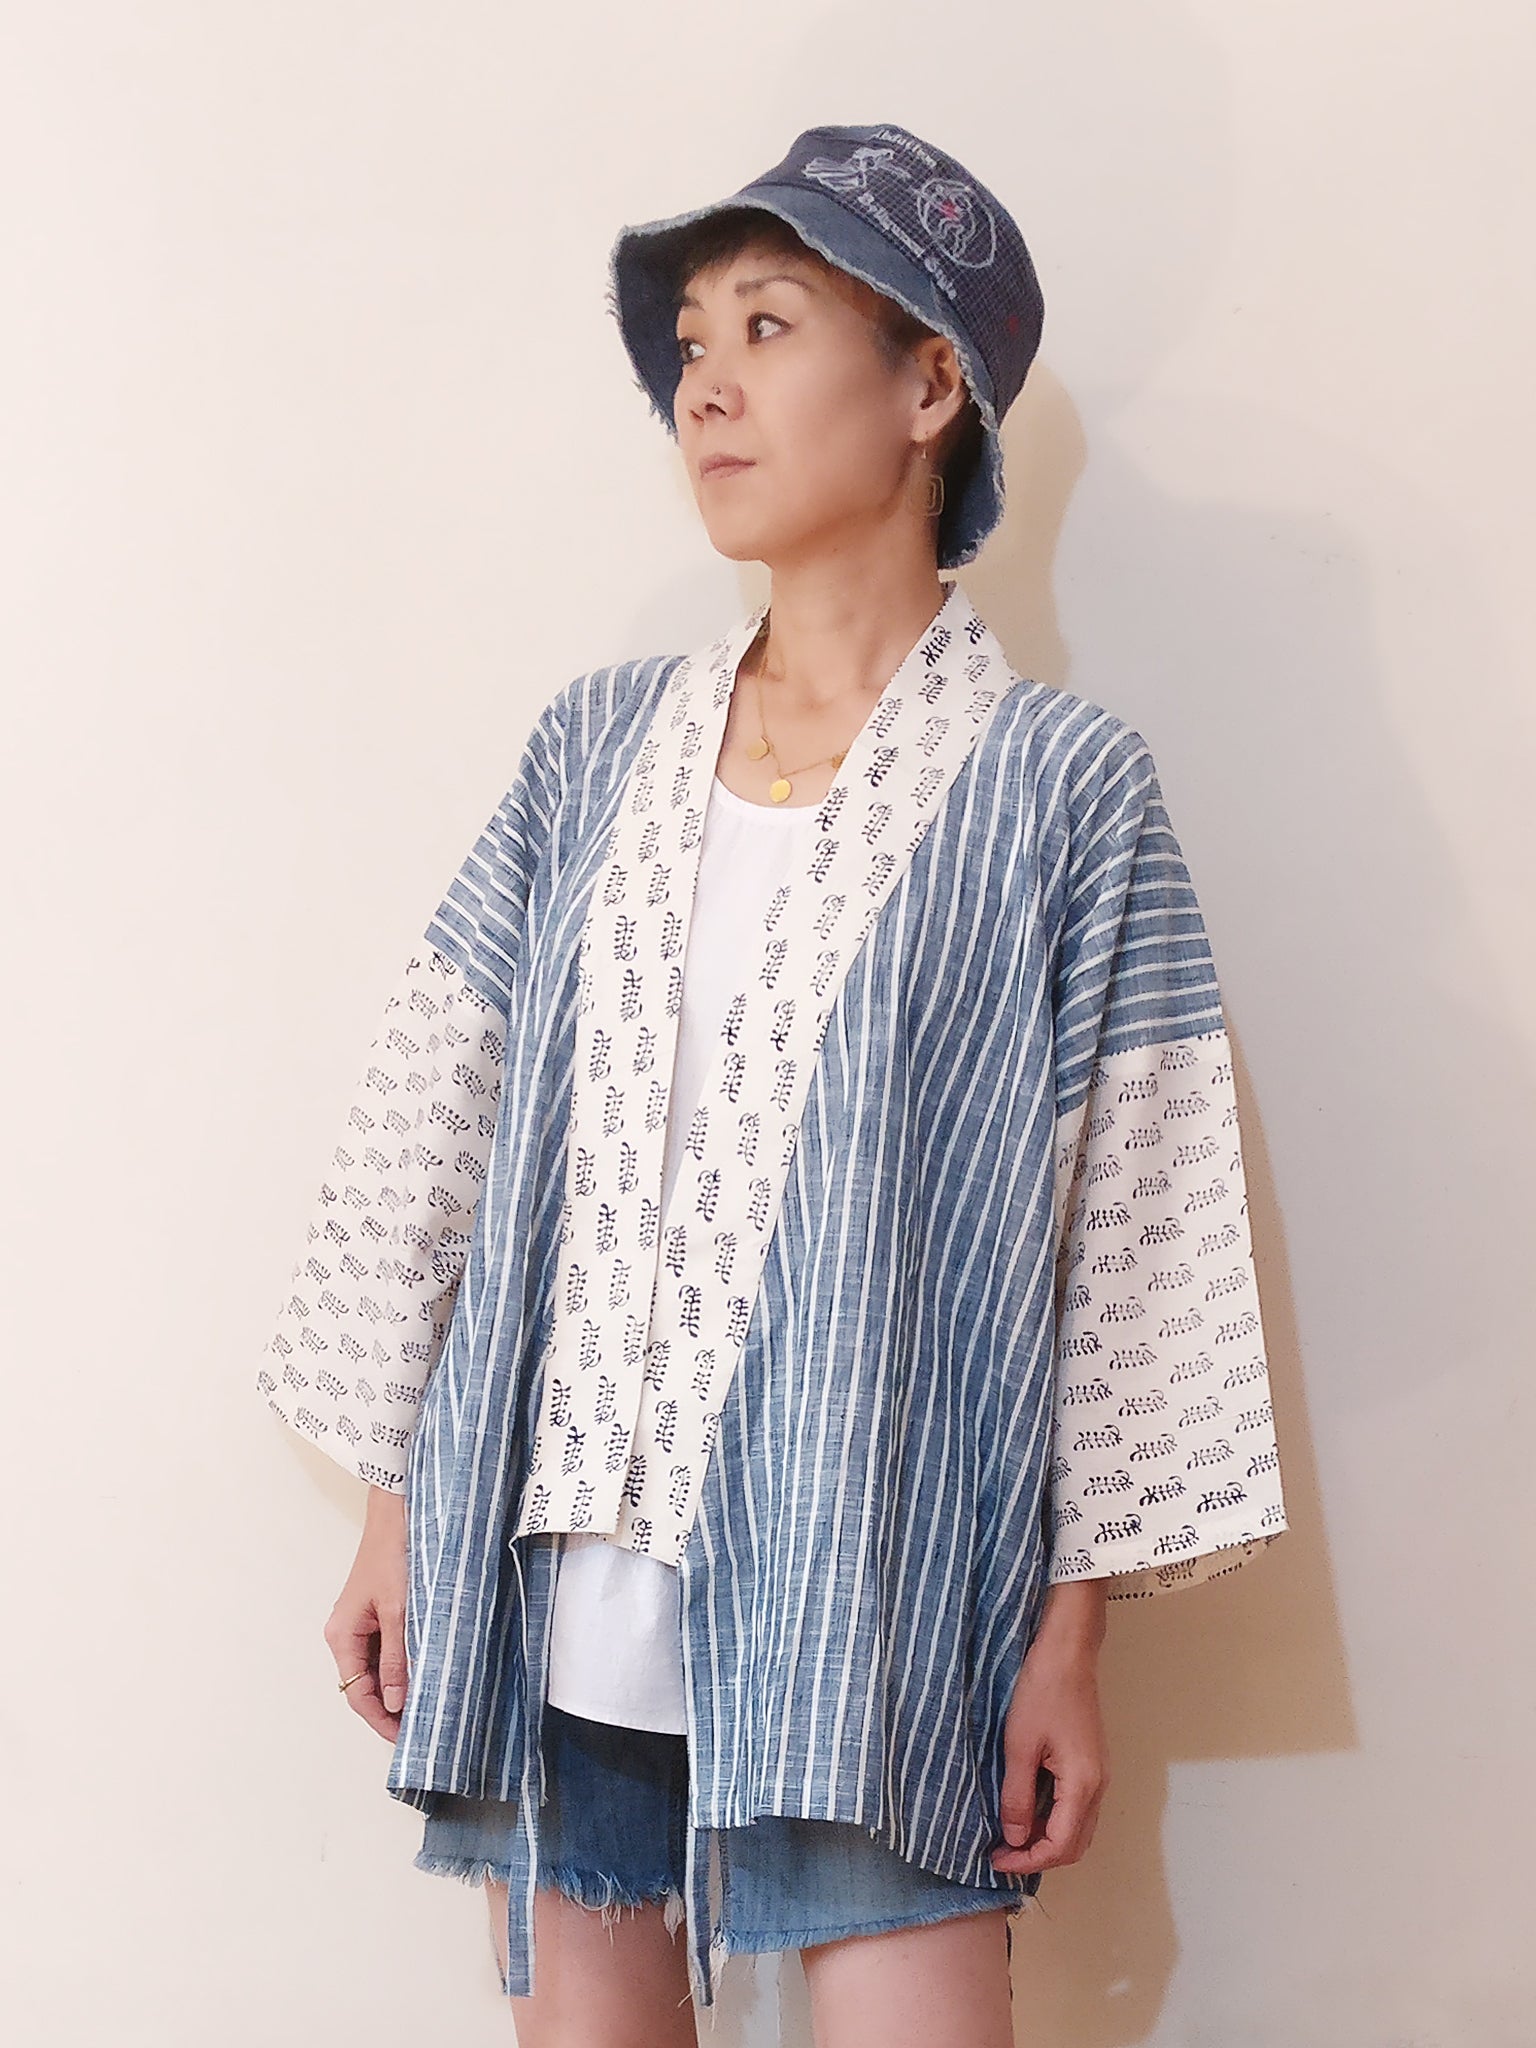 Kimono Jacket with a handloom cotton stripe with a delicate Mul Mul white (and blue) cotton print. Very very comfy, light, chic and calming. Buy online. With the strings open.